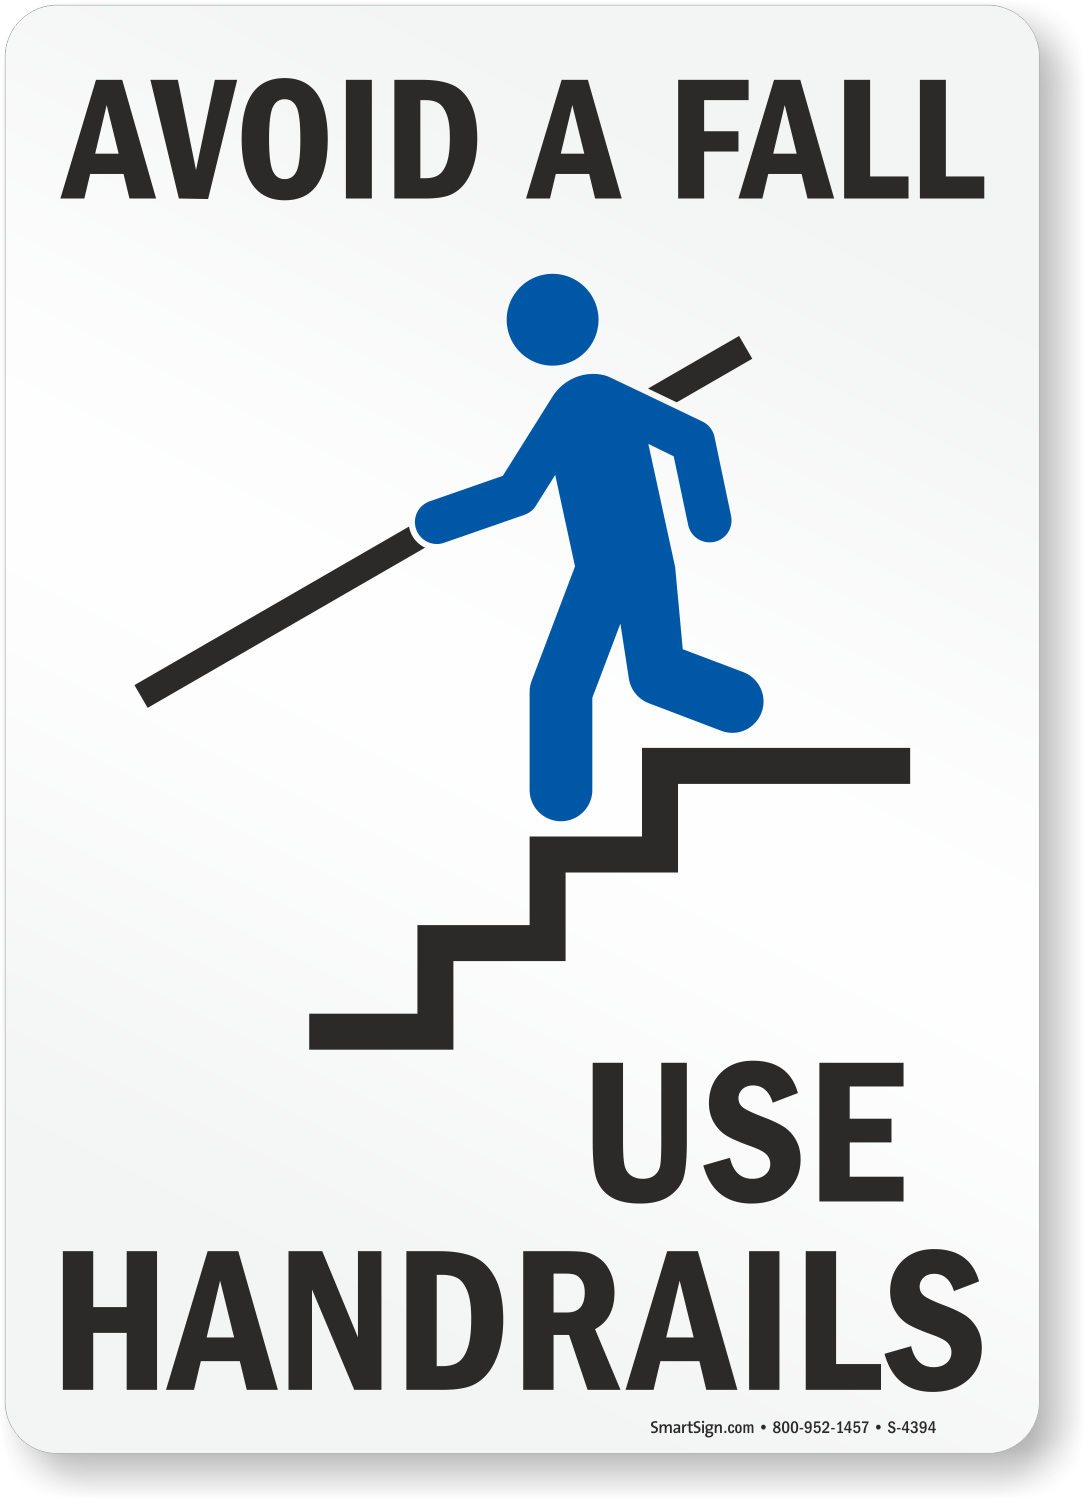 Av id. Use Handrail sign. Avoid. Fall from Staircase sign. Signs in Stairs.